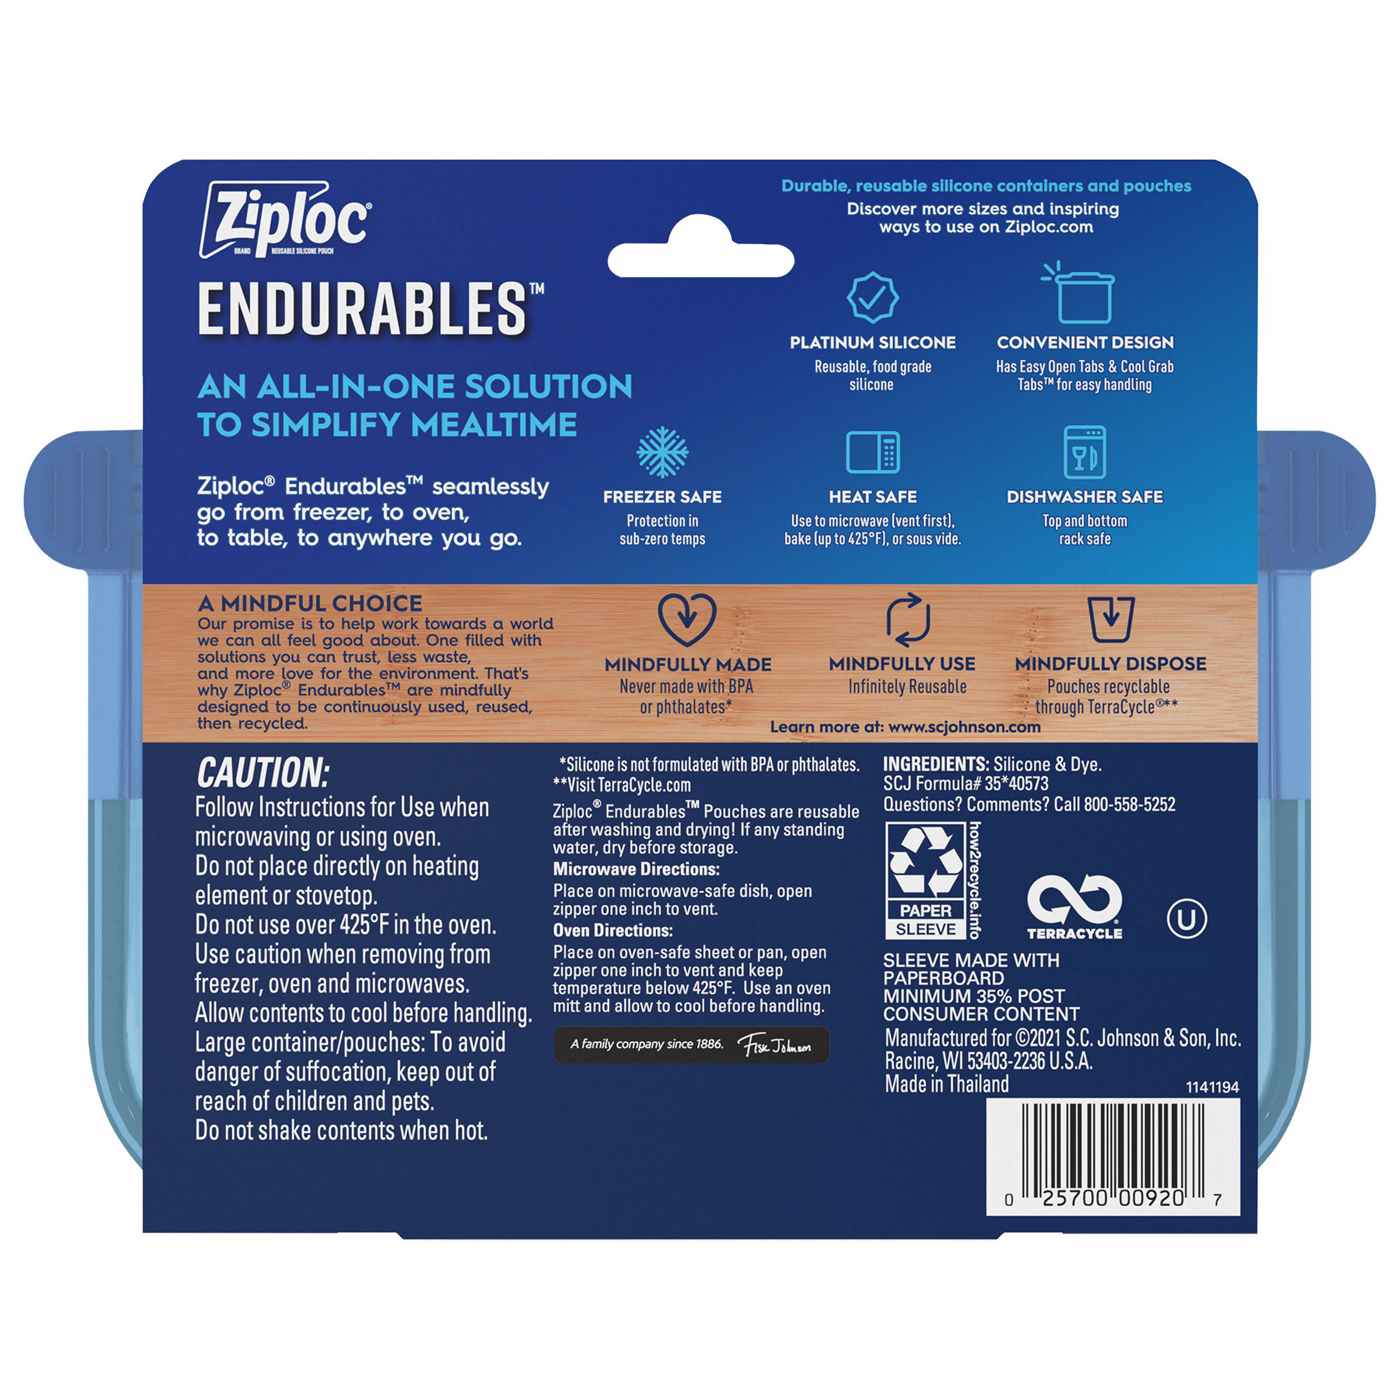 Ziploc Endurables Silicone Pouch - Small; image 6 of 12